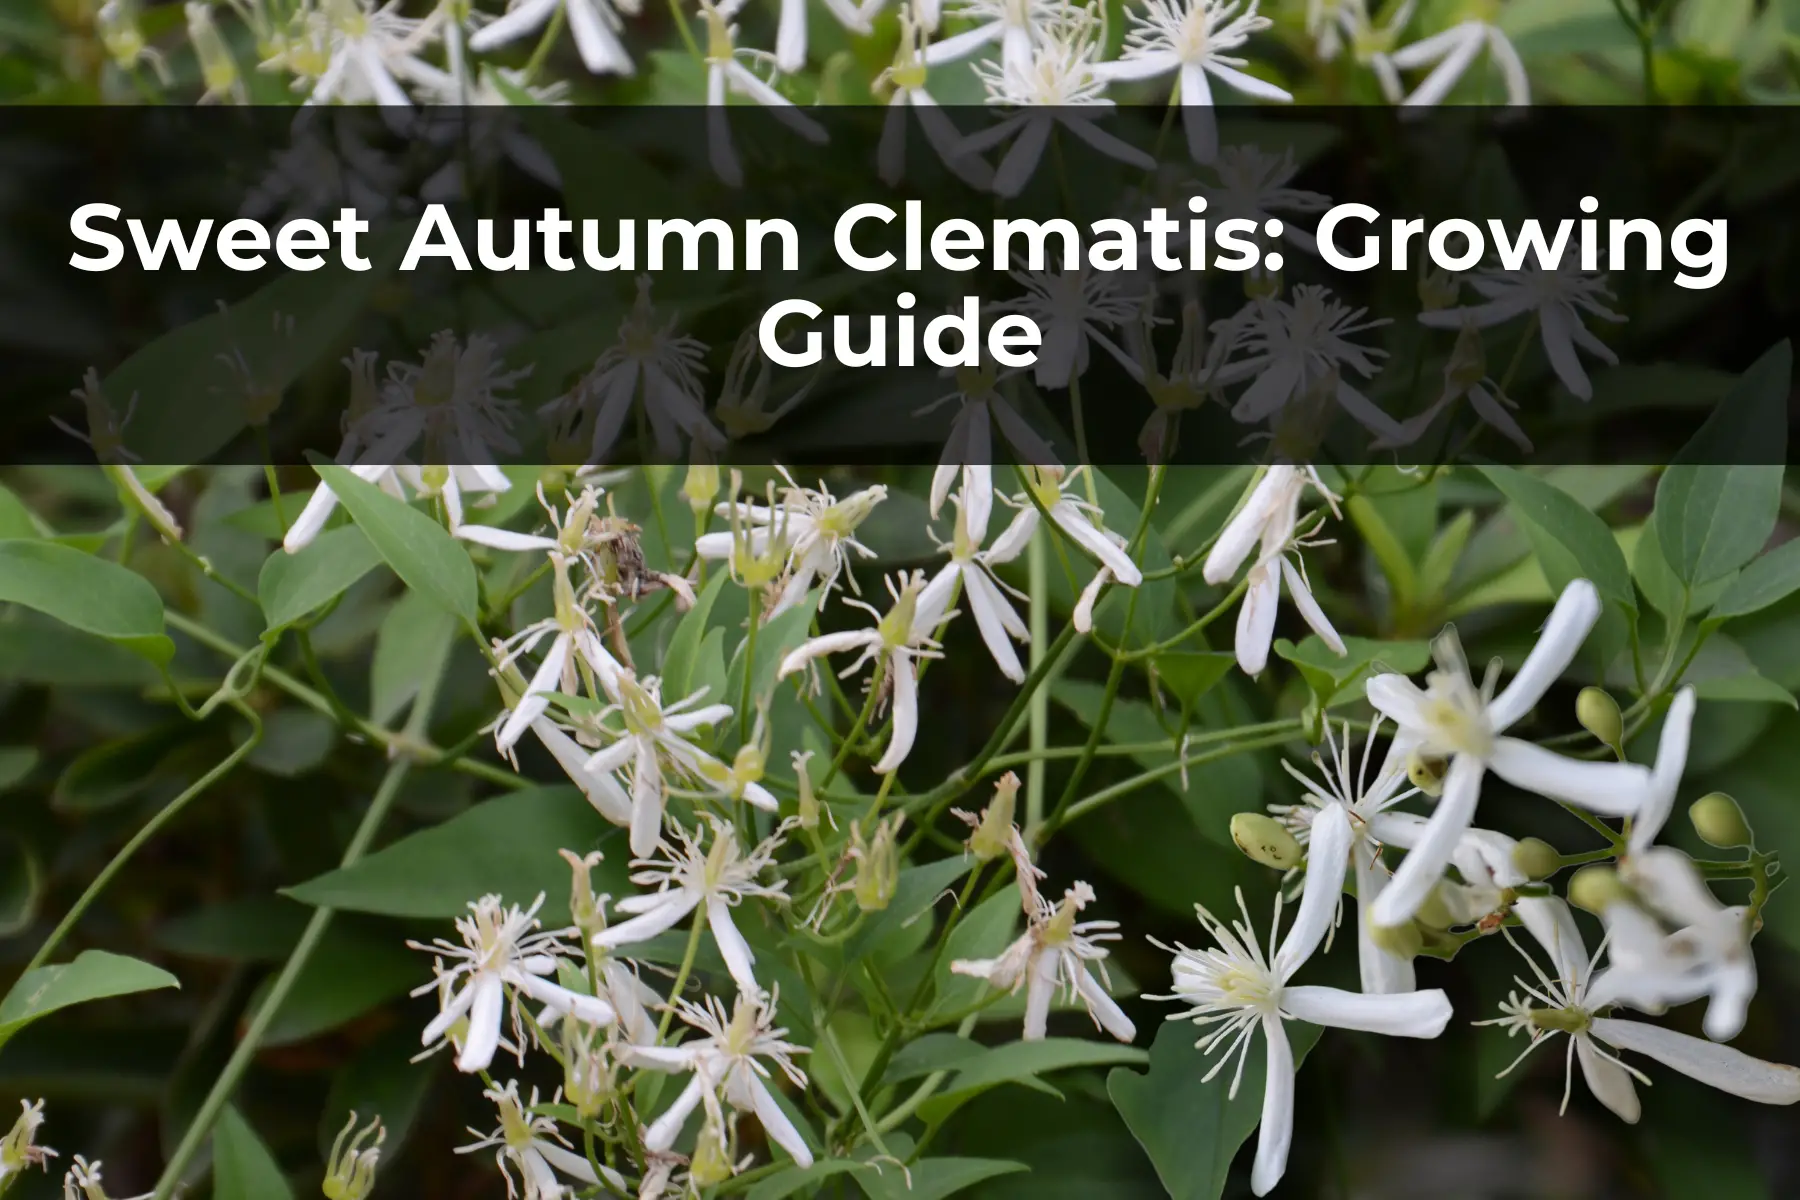 Sweet Autumn Clematis: Growing Guide